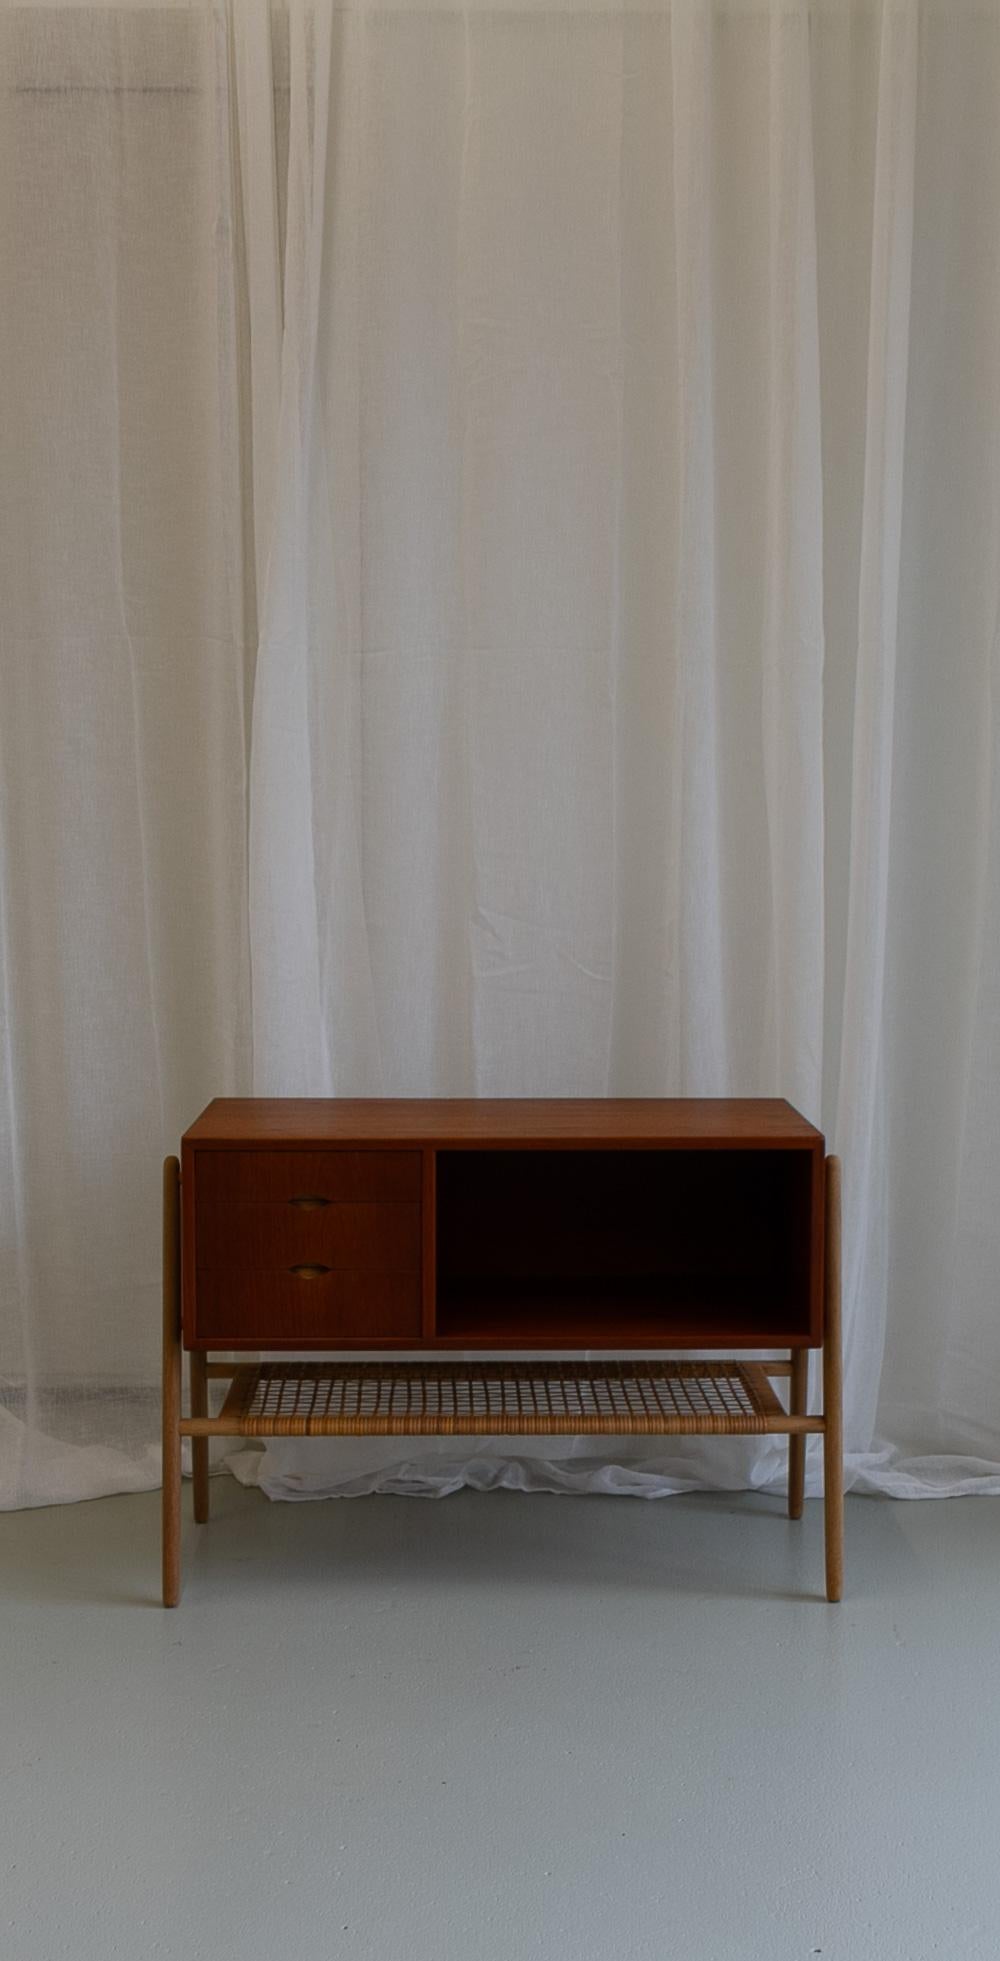 Danish Modern Teak and Oak Console Table with Cane Shelf, 1960s.

Danish Mid-Century Modern design small hall cabinet in teak and oak. Designed and manufactured by Valdemar Mortensen in Odense, Denmark. Three drawers and open shelf. Underneath is a